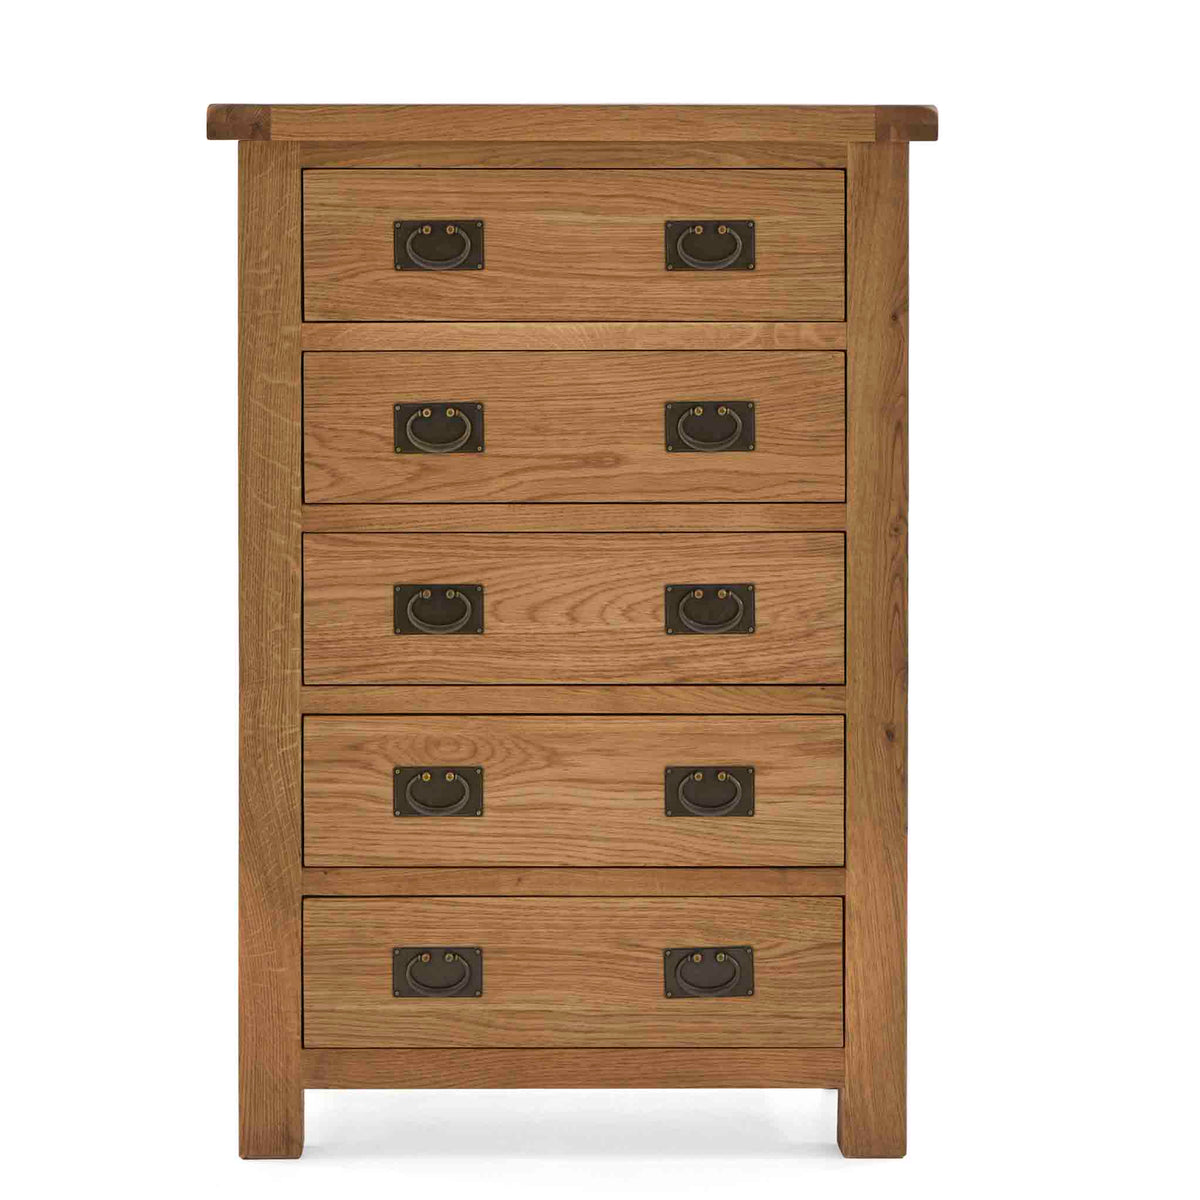 Zelah Oak 5 Drawer Chest of Drawers - Front view